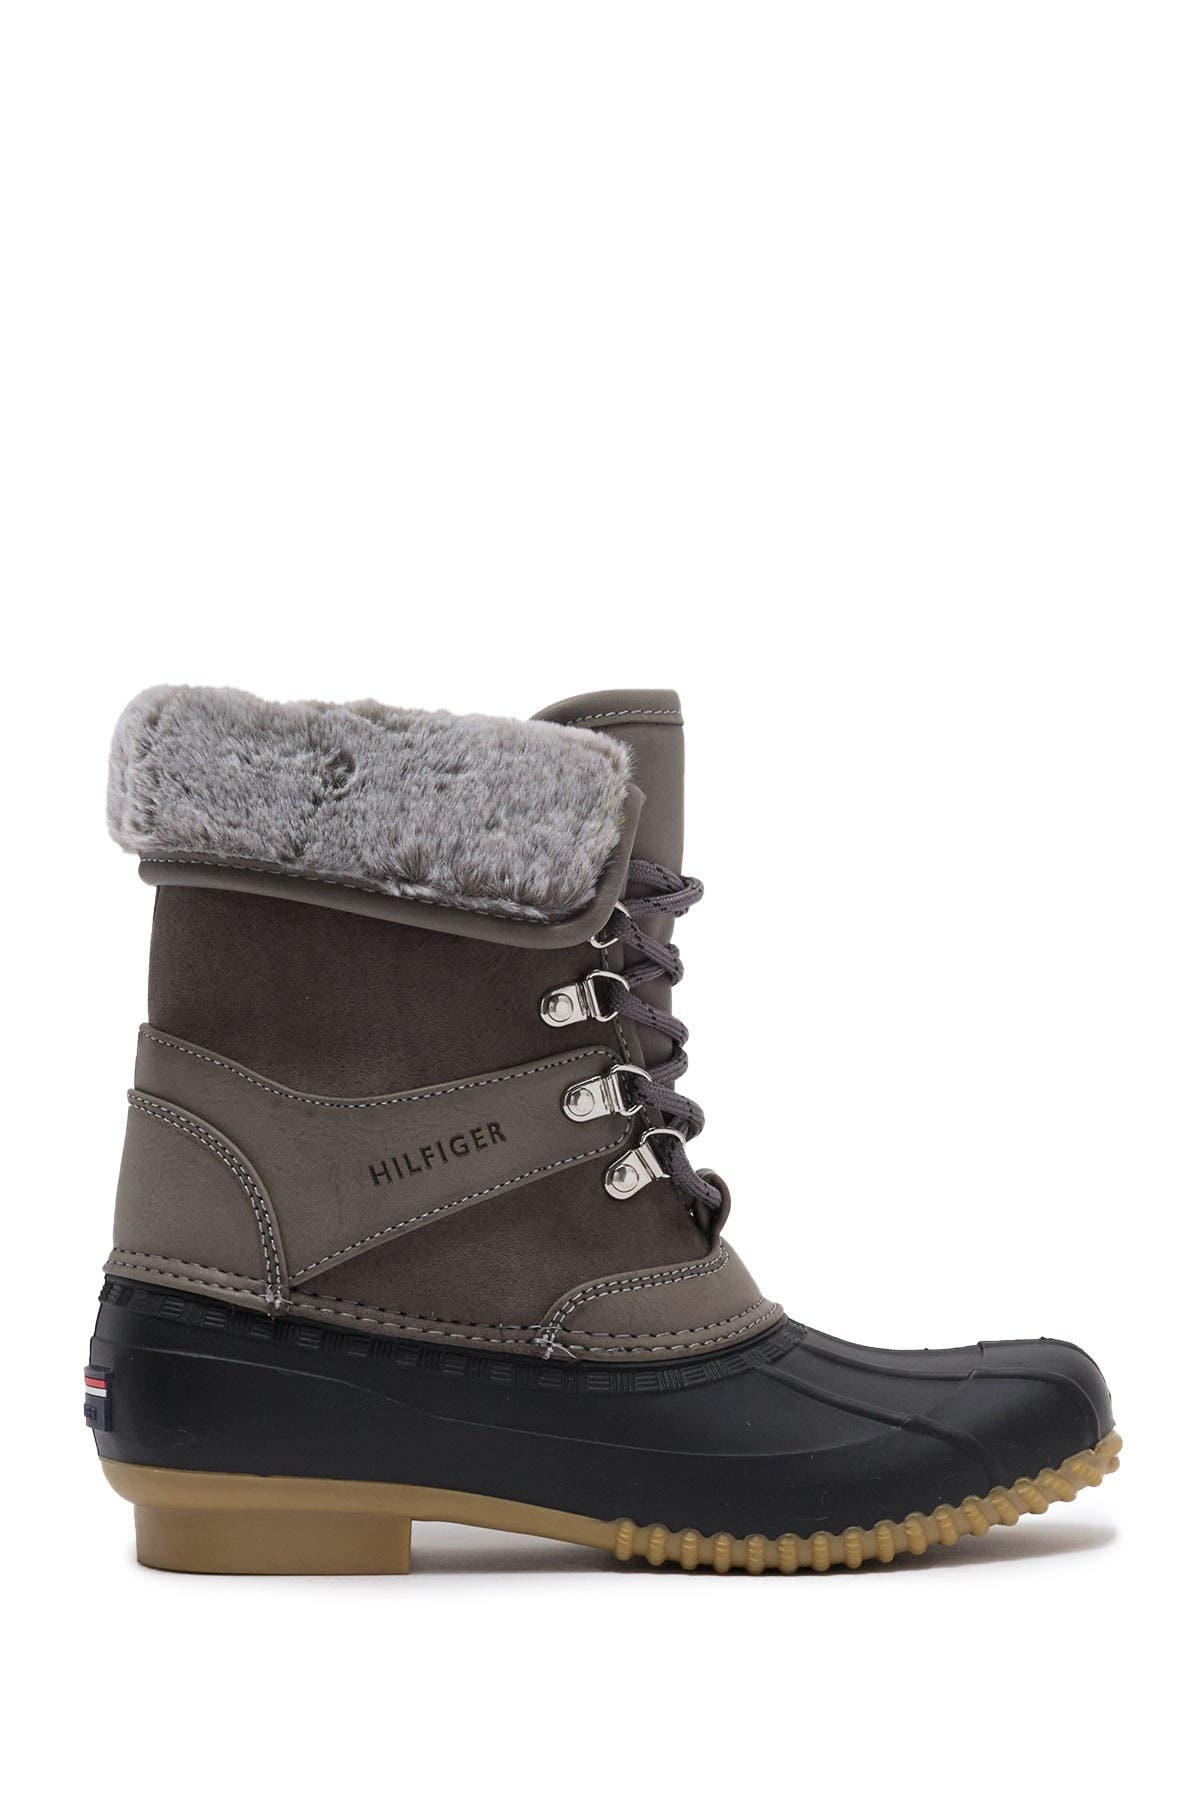 tommy hilfiger rusteen faux shearling lined duck boot